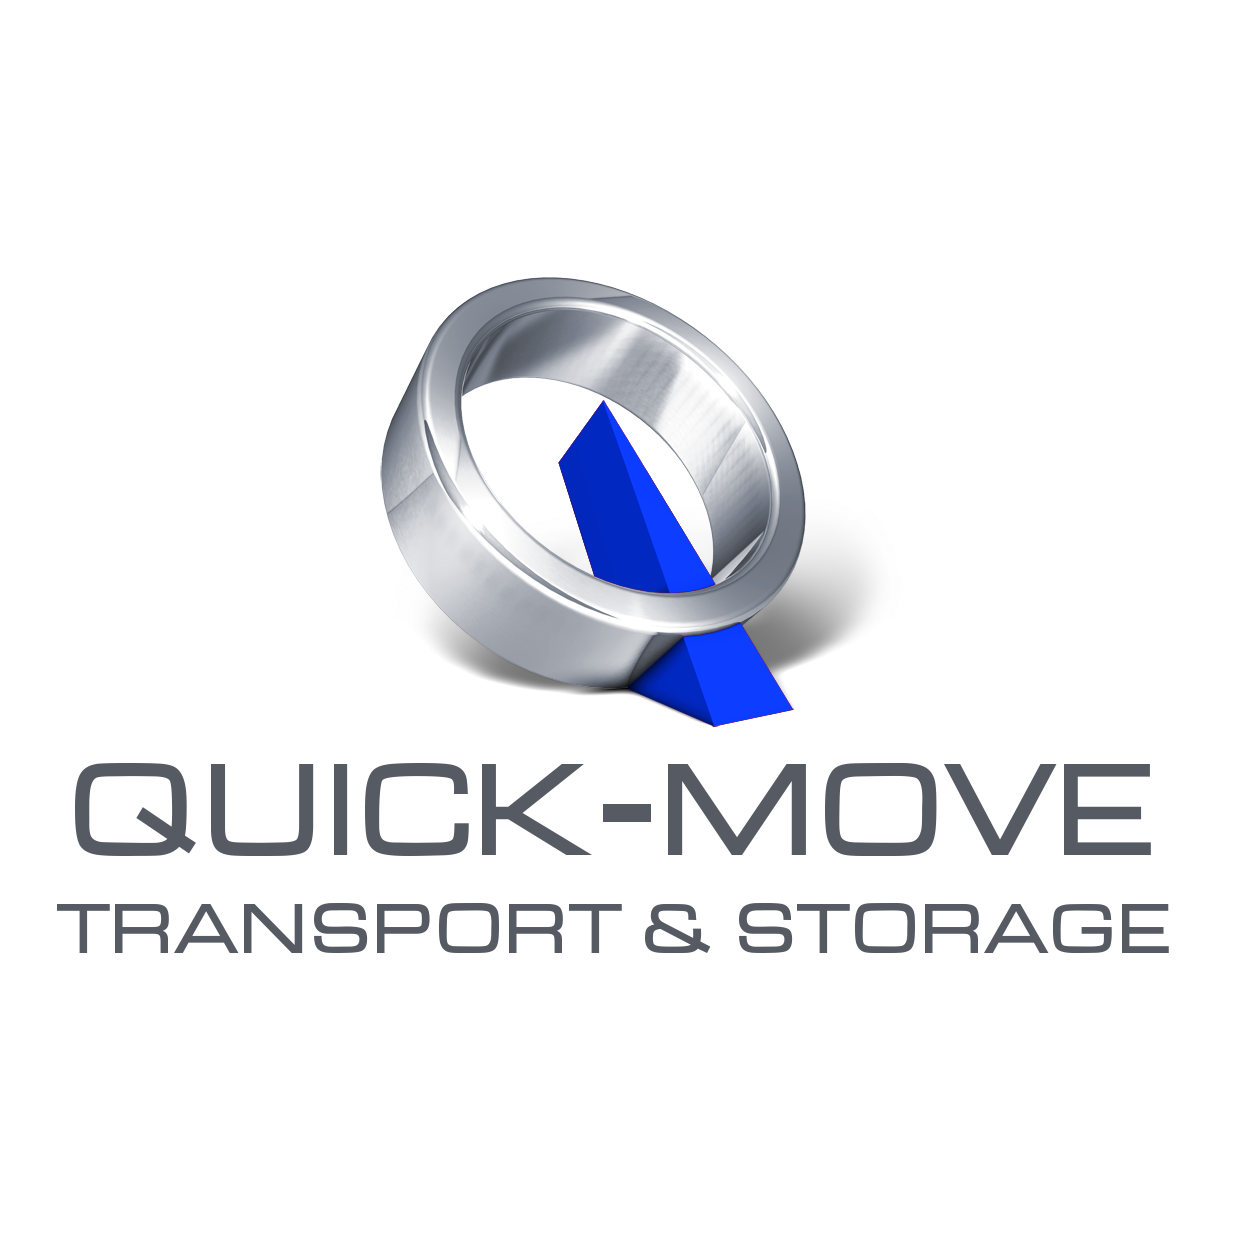 Quick Move Transport is rated one of the best local moving companies around with more than a decade of experience.